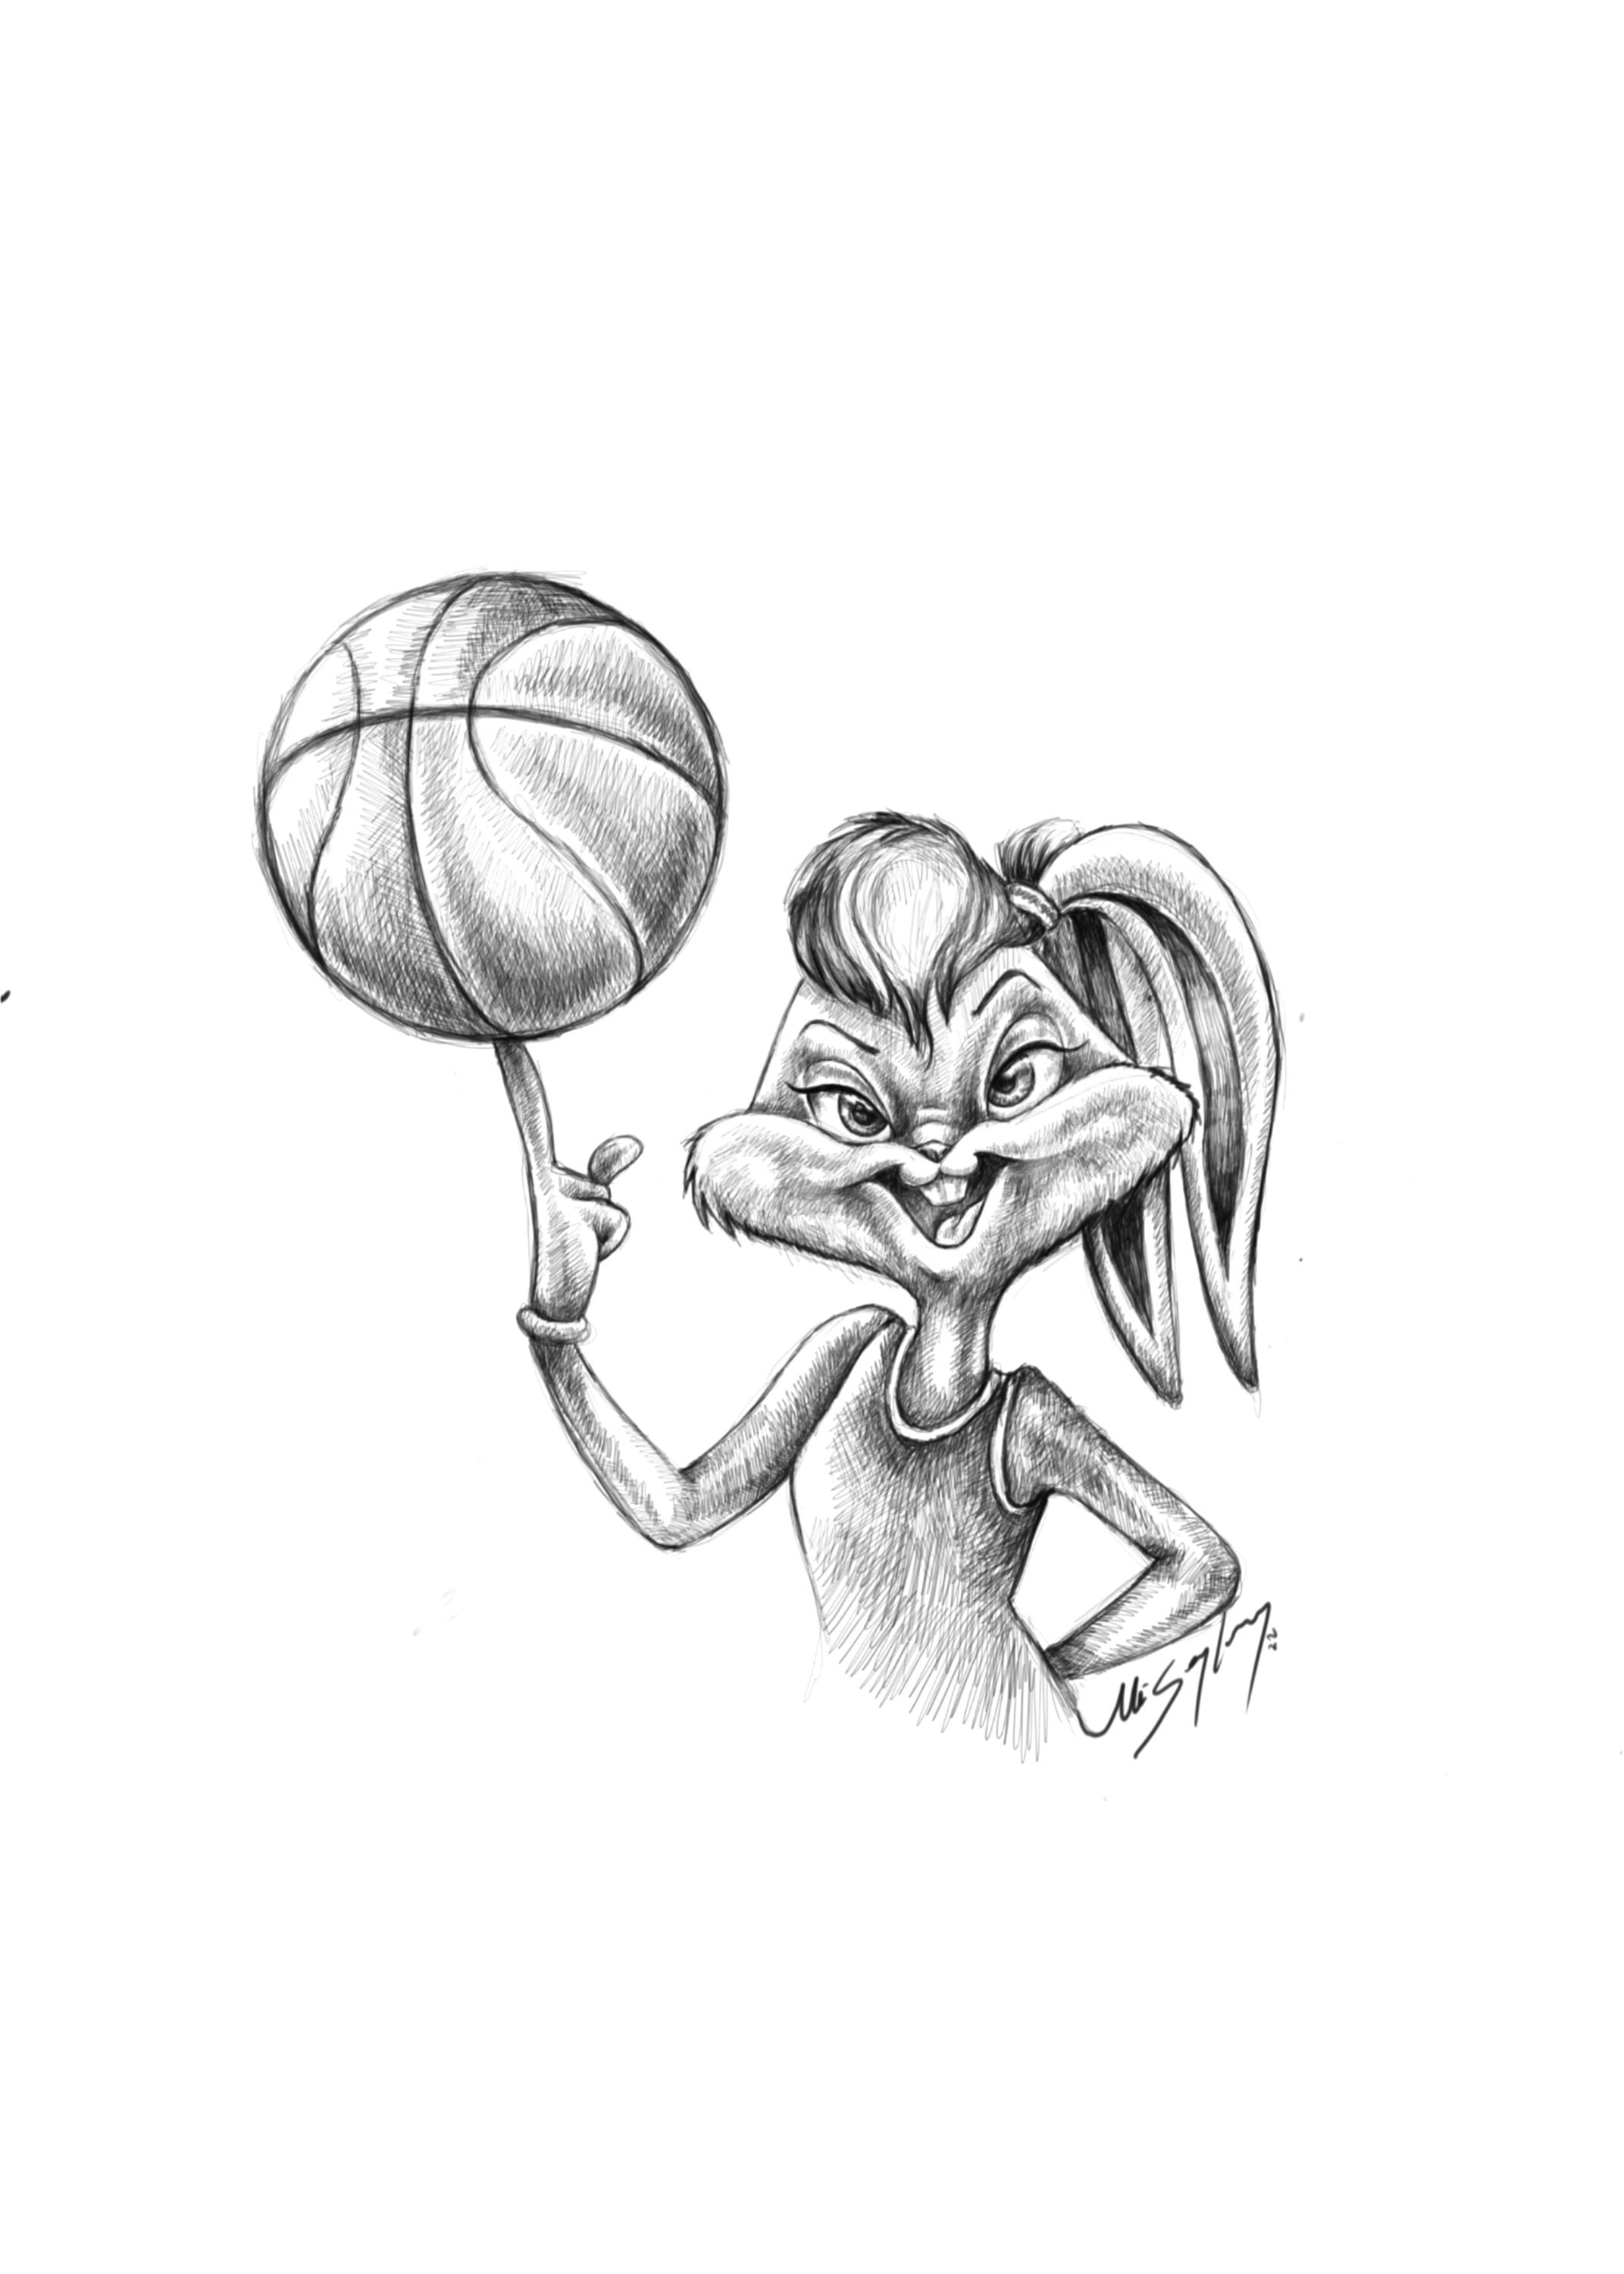 Bugs Bunny loves Lola Bunny Coloring Pages  Lola Bunny Coloring Pages   Coloring Pages For Kids And Adults